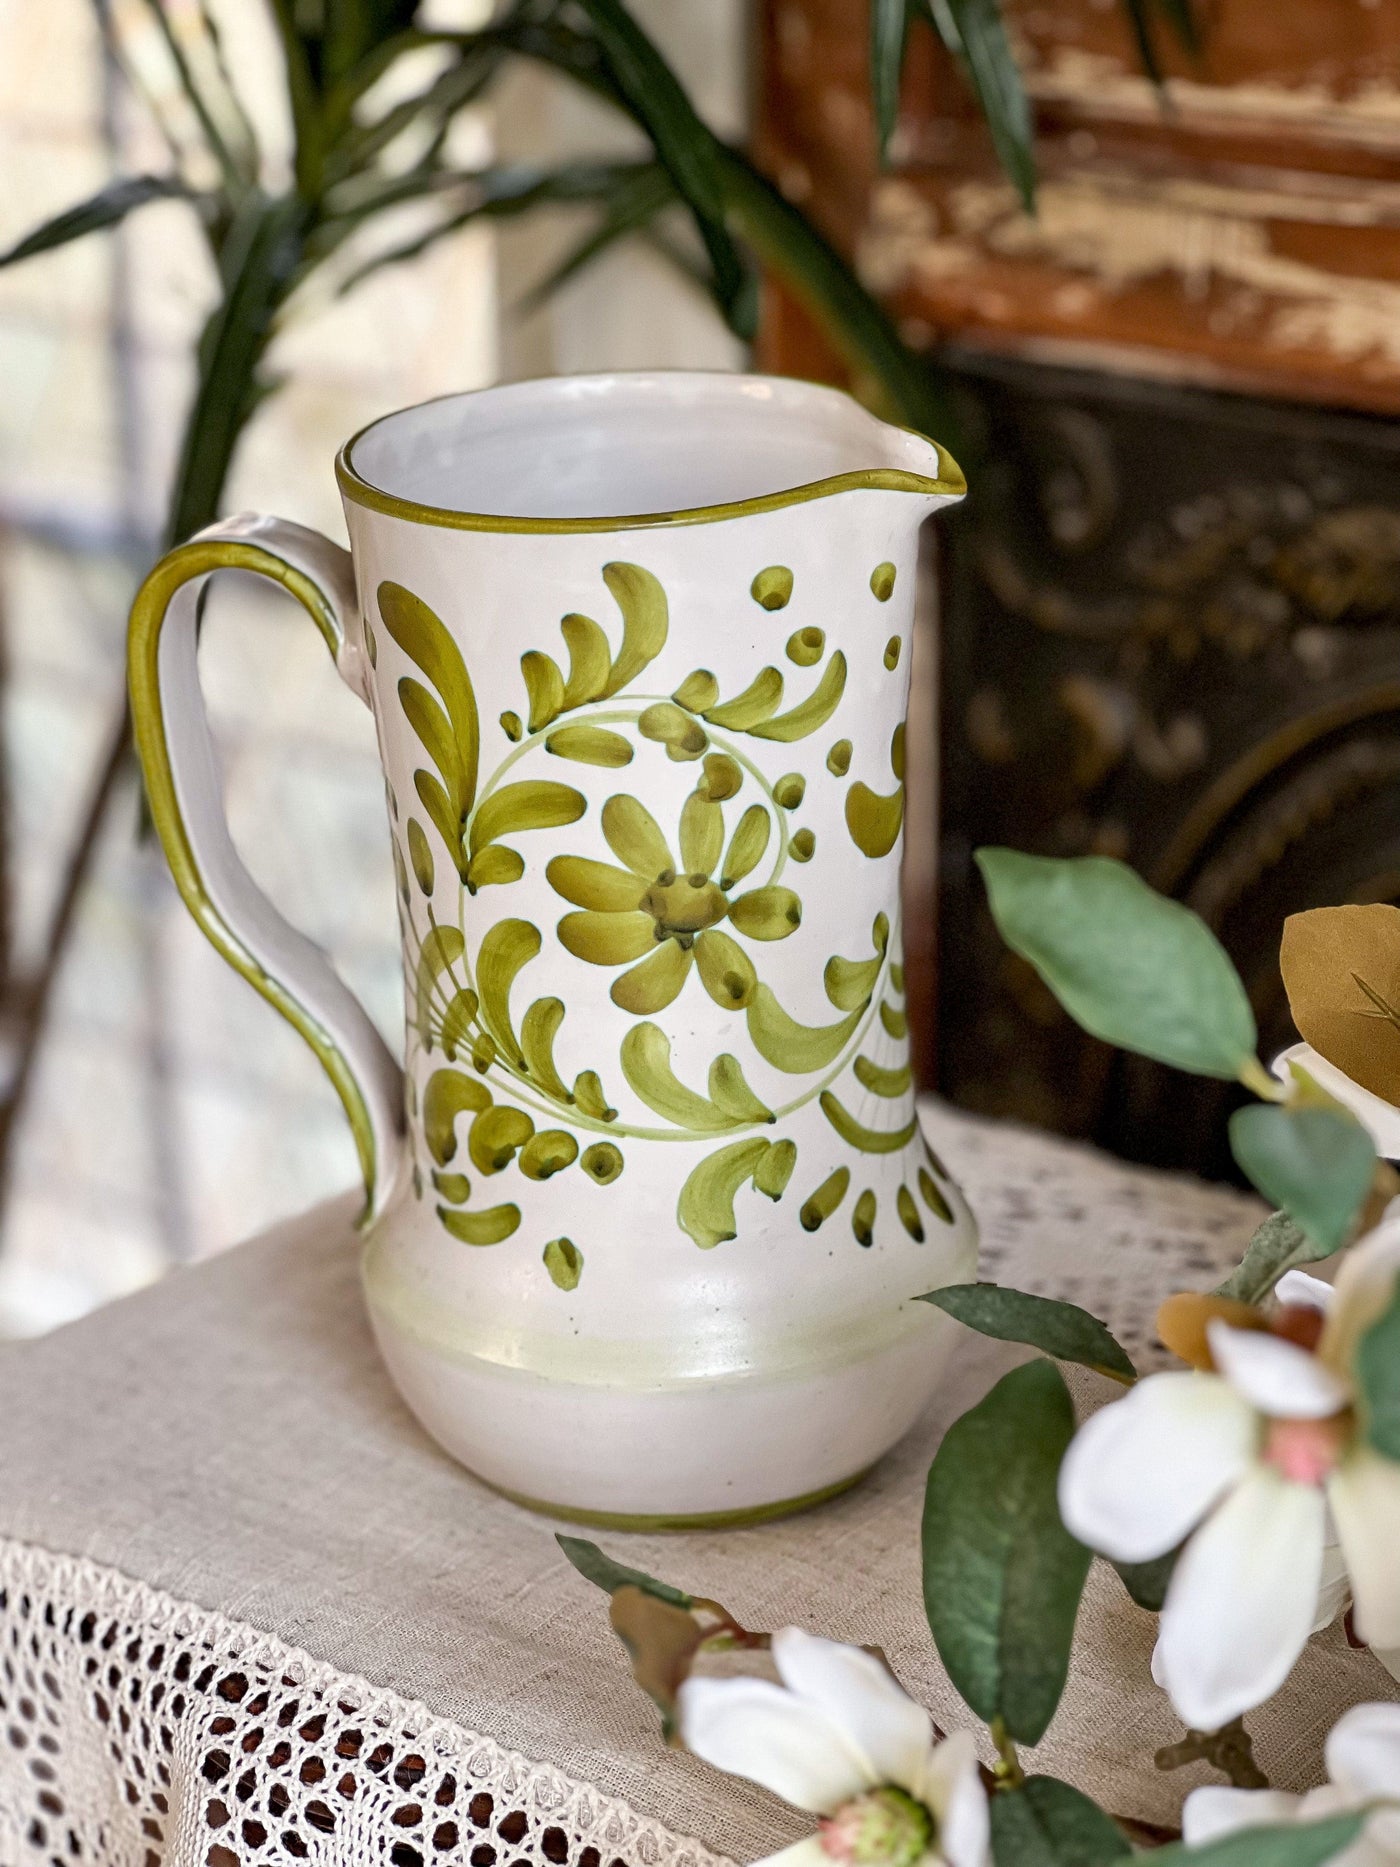 HANDPAINTED LEAVES ITALIAN PITCHER Revive In Style Vintage Furniture Painted Refinished Redesign Beautiful One of a Kind Artistic Antique Unique Home Decor Interior Design French Country Shabby Chic Cottage Farmhouse Grandmillenial Coastal Chalk Paint Metallic Glam Eclectic Quality Dovetailed Rustic Furniture Painter Pinterest Bedroom Living Room Entryway Kitchen Home Trends House Styles Decorating ideas